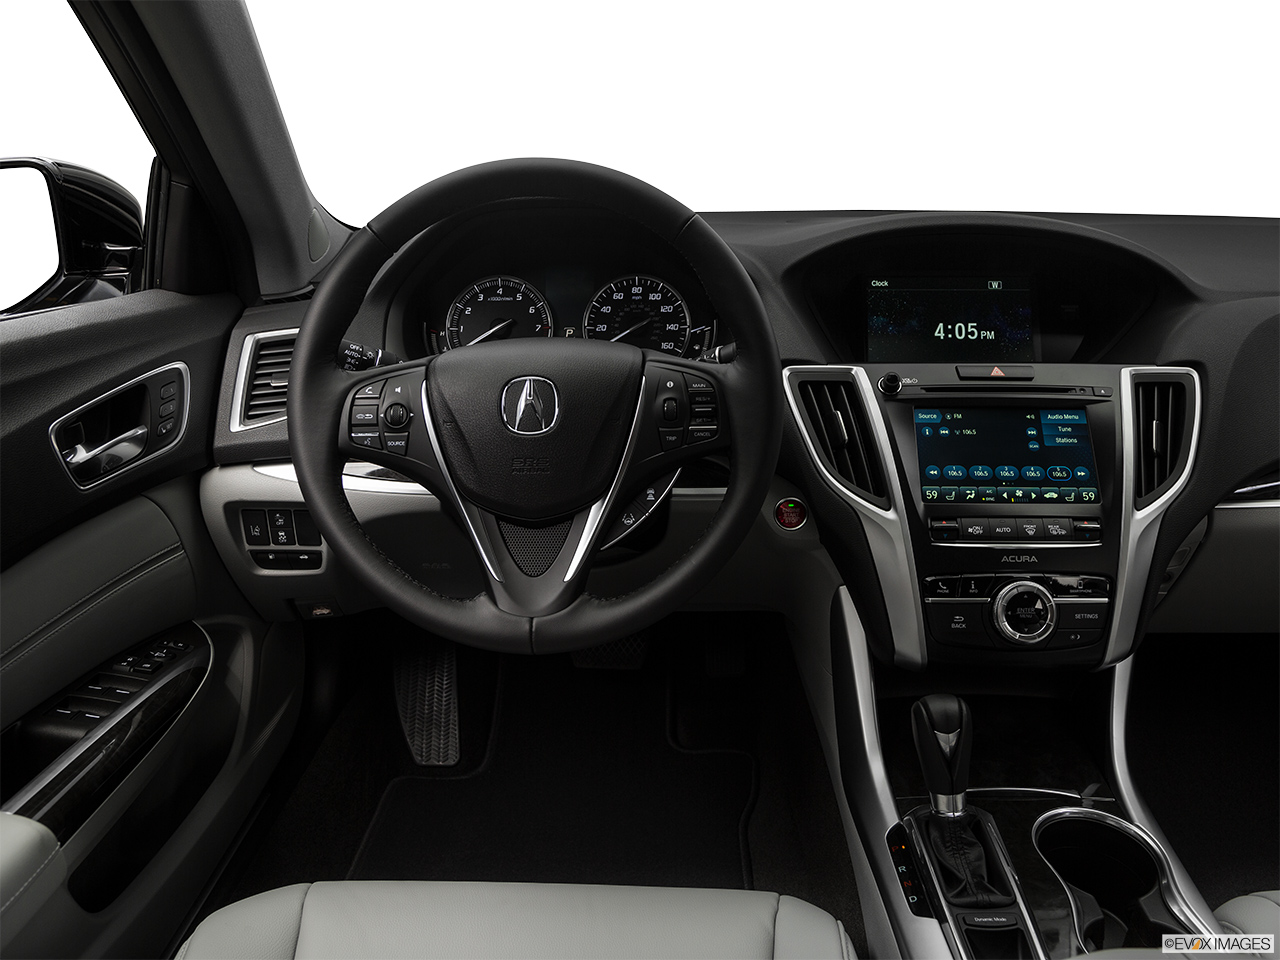 2019 Acura TLX 2.4 8-DCT P-AWS Steering wheel/Center Console. 